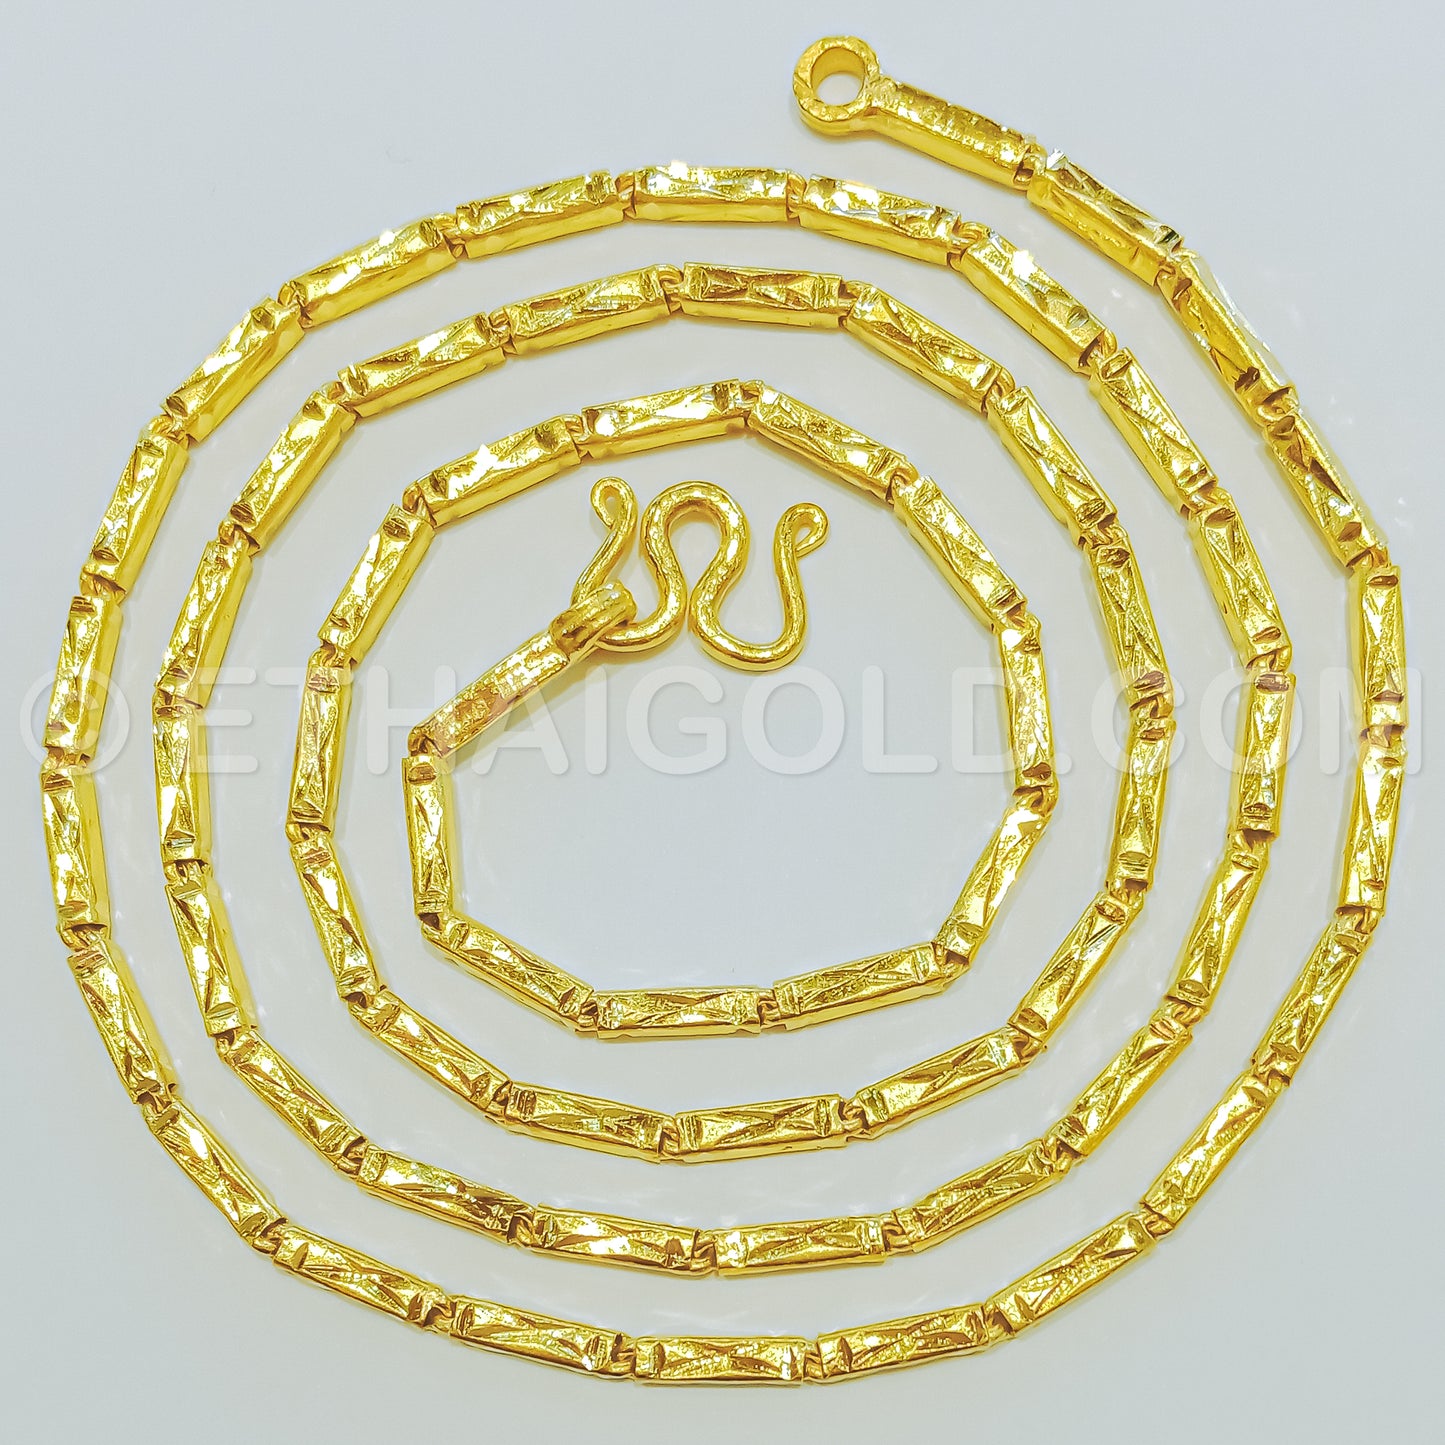 5 BAHT POLISHED DIAMOND-CUT SOLID SQUARE BARREL CHAIN NECKLACE IN 23K GOLD (ID: N3205B)